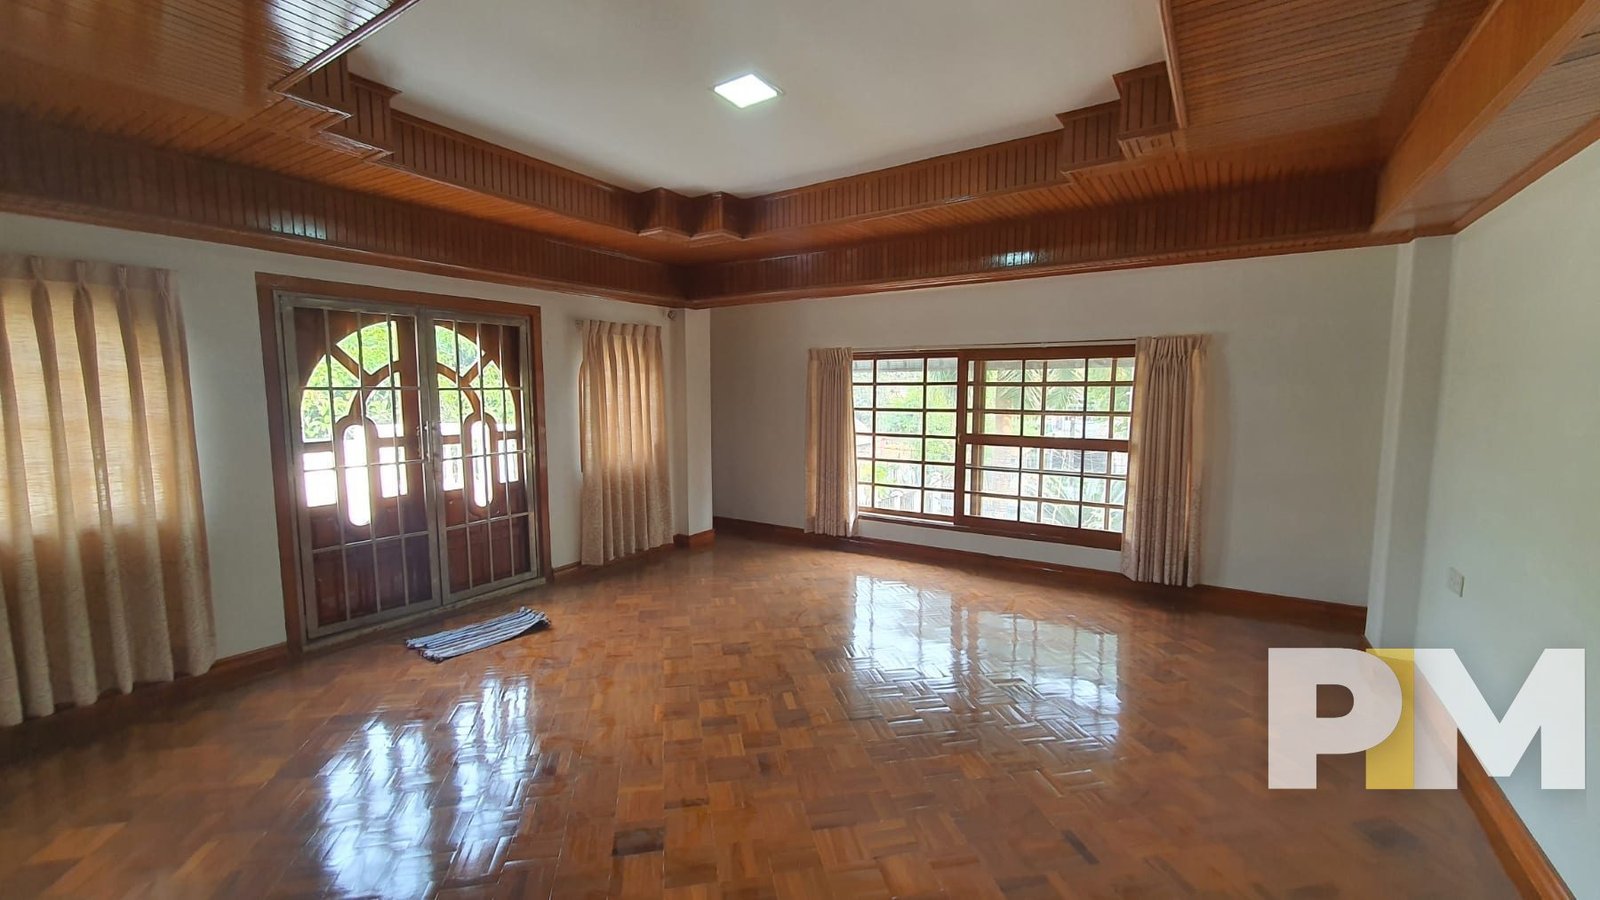 room with curtains - Yangon Real Estate